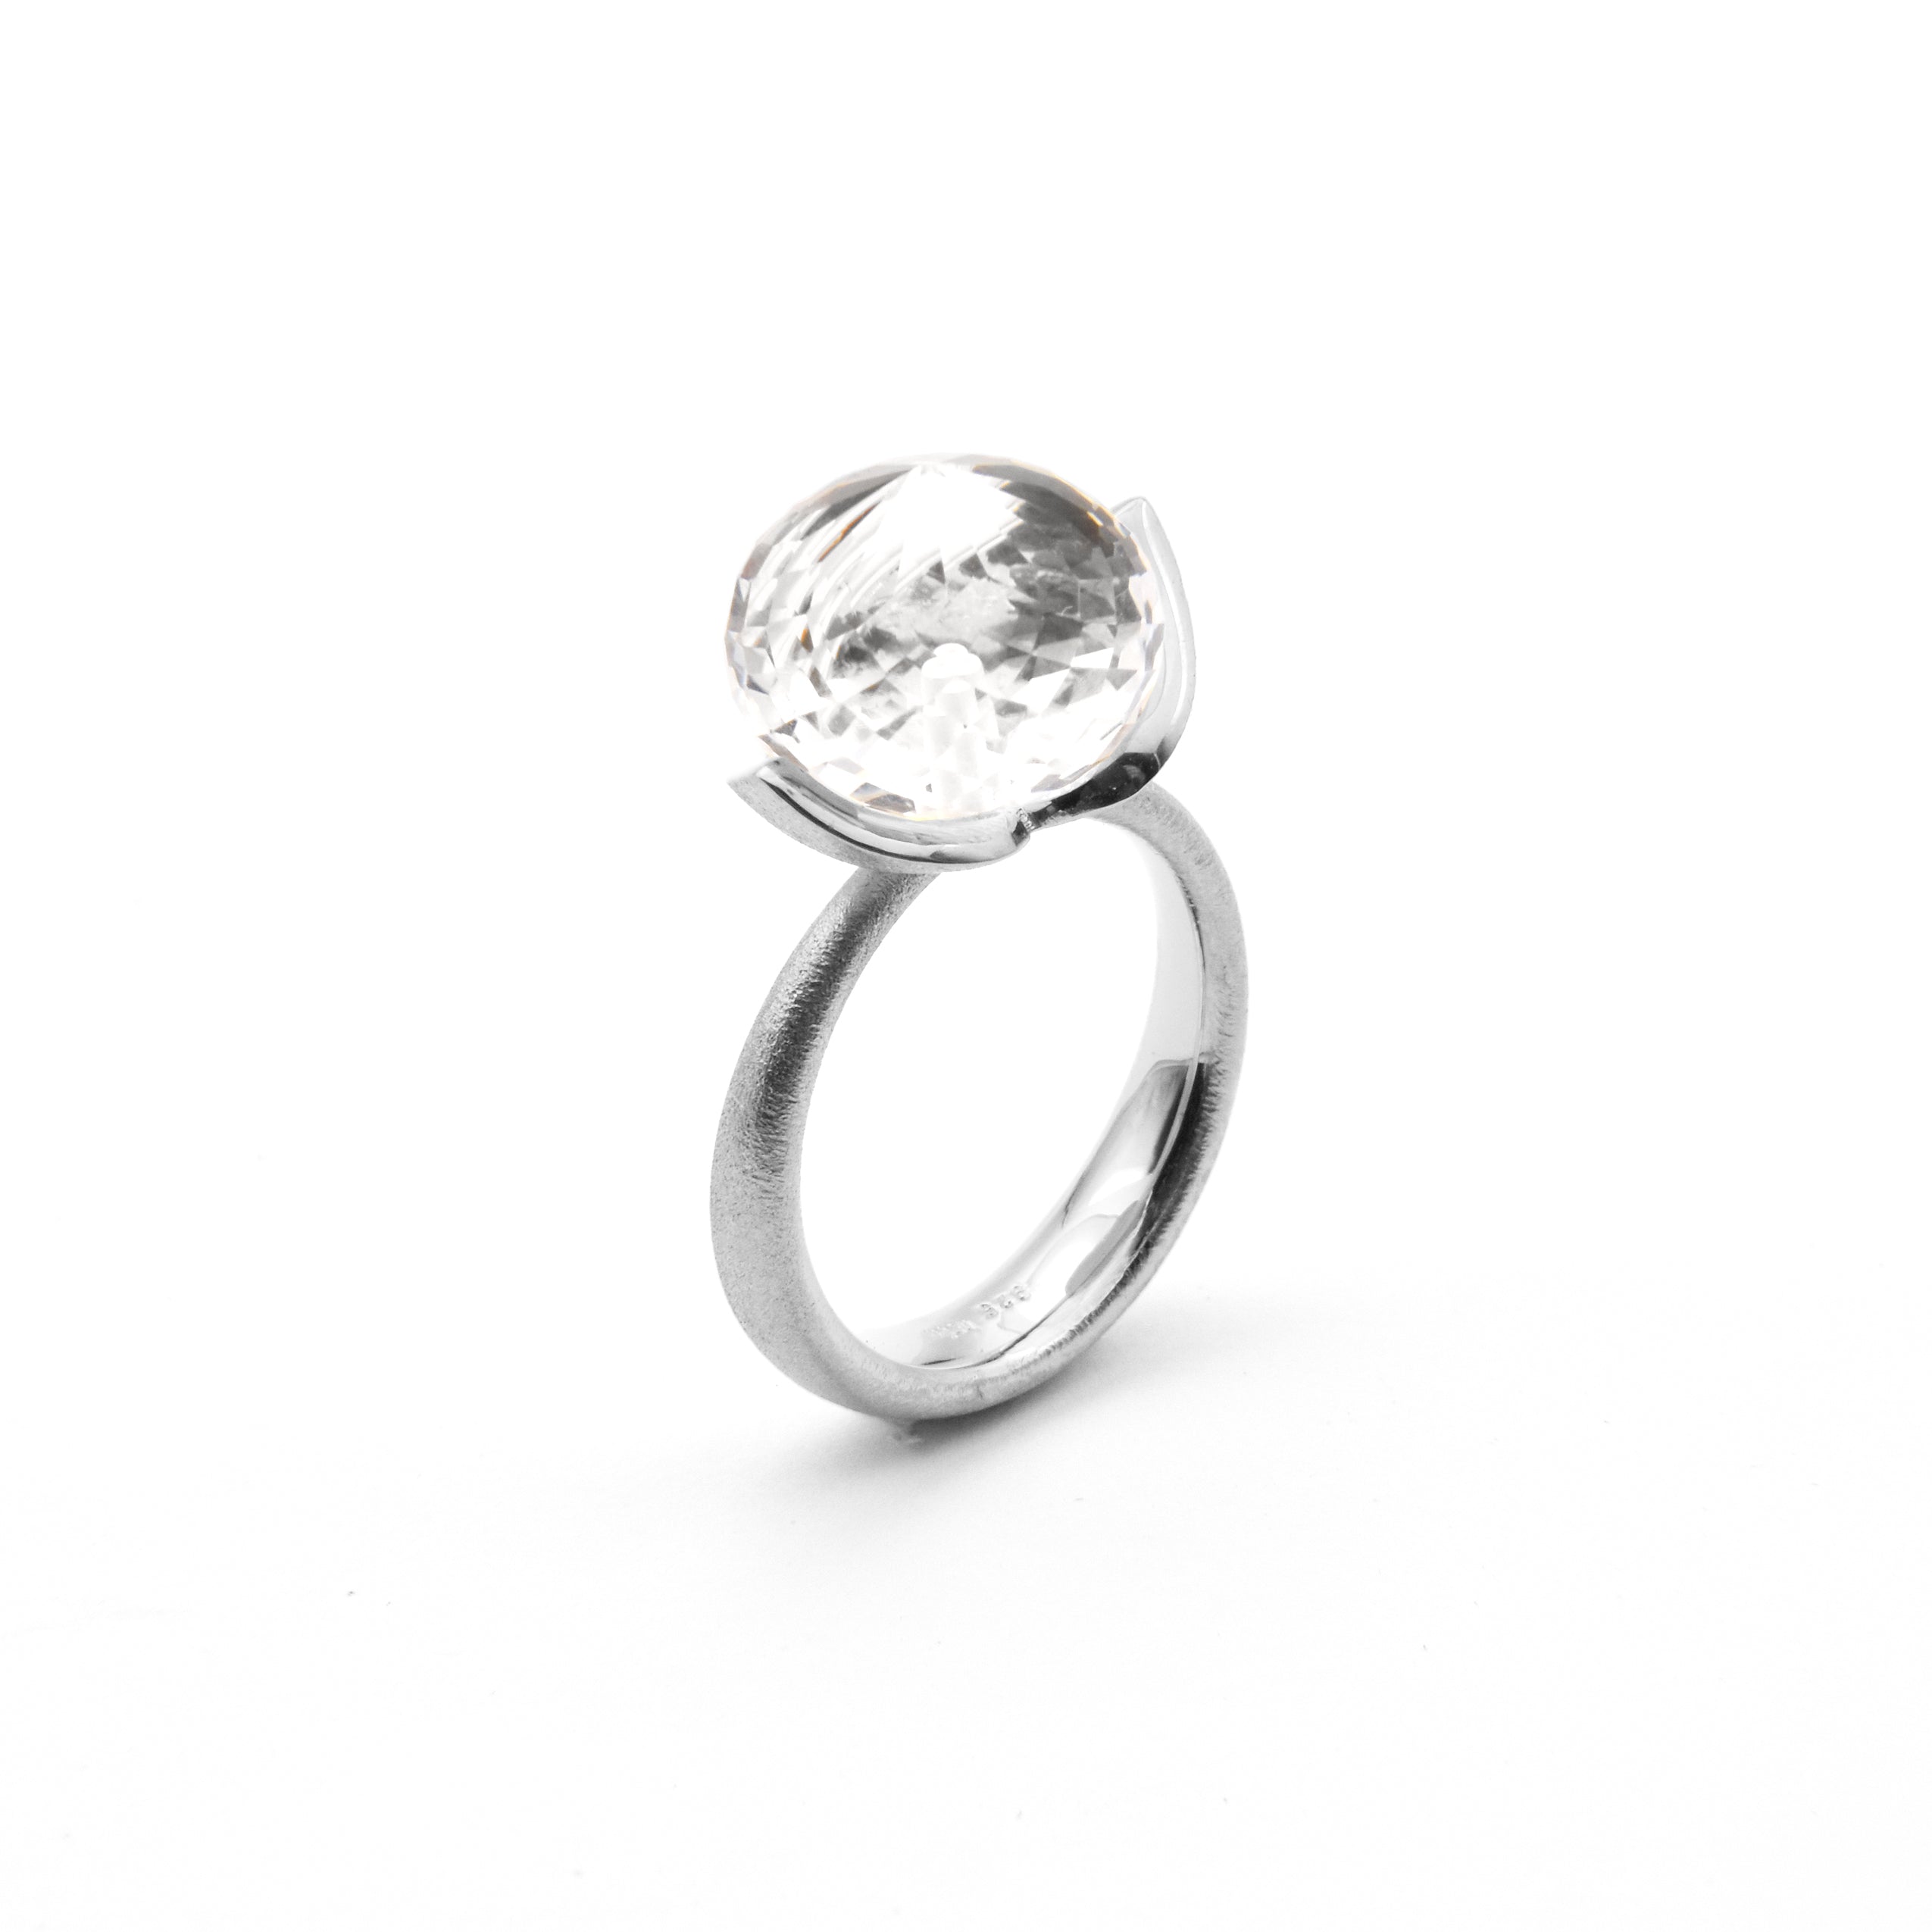 Dolce ring "big" with rock crystal 925/-